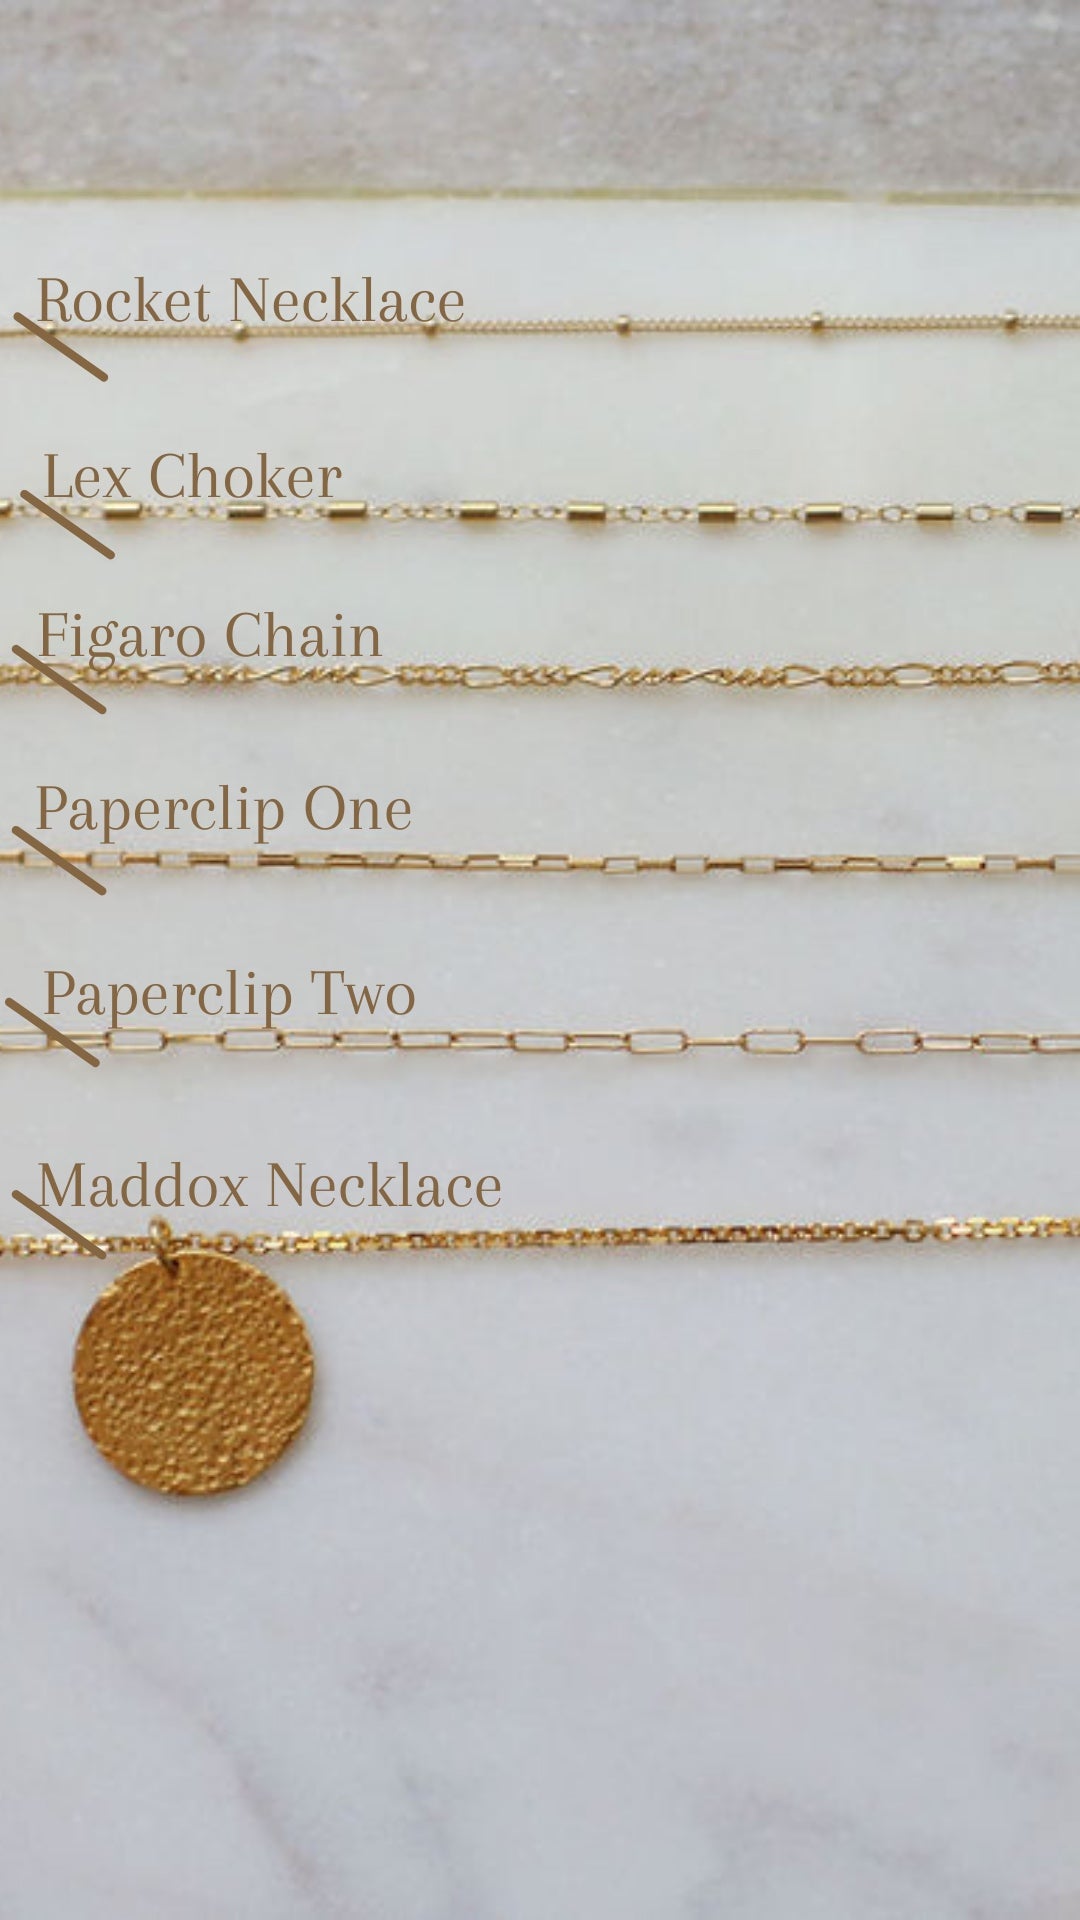 Maddox Necklace